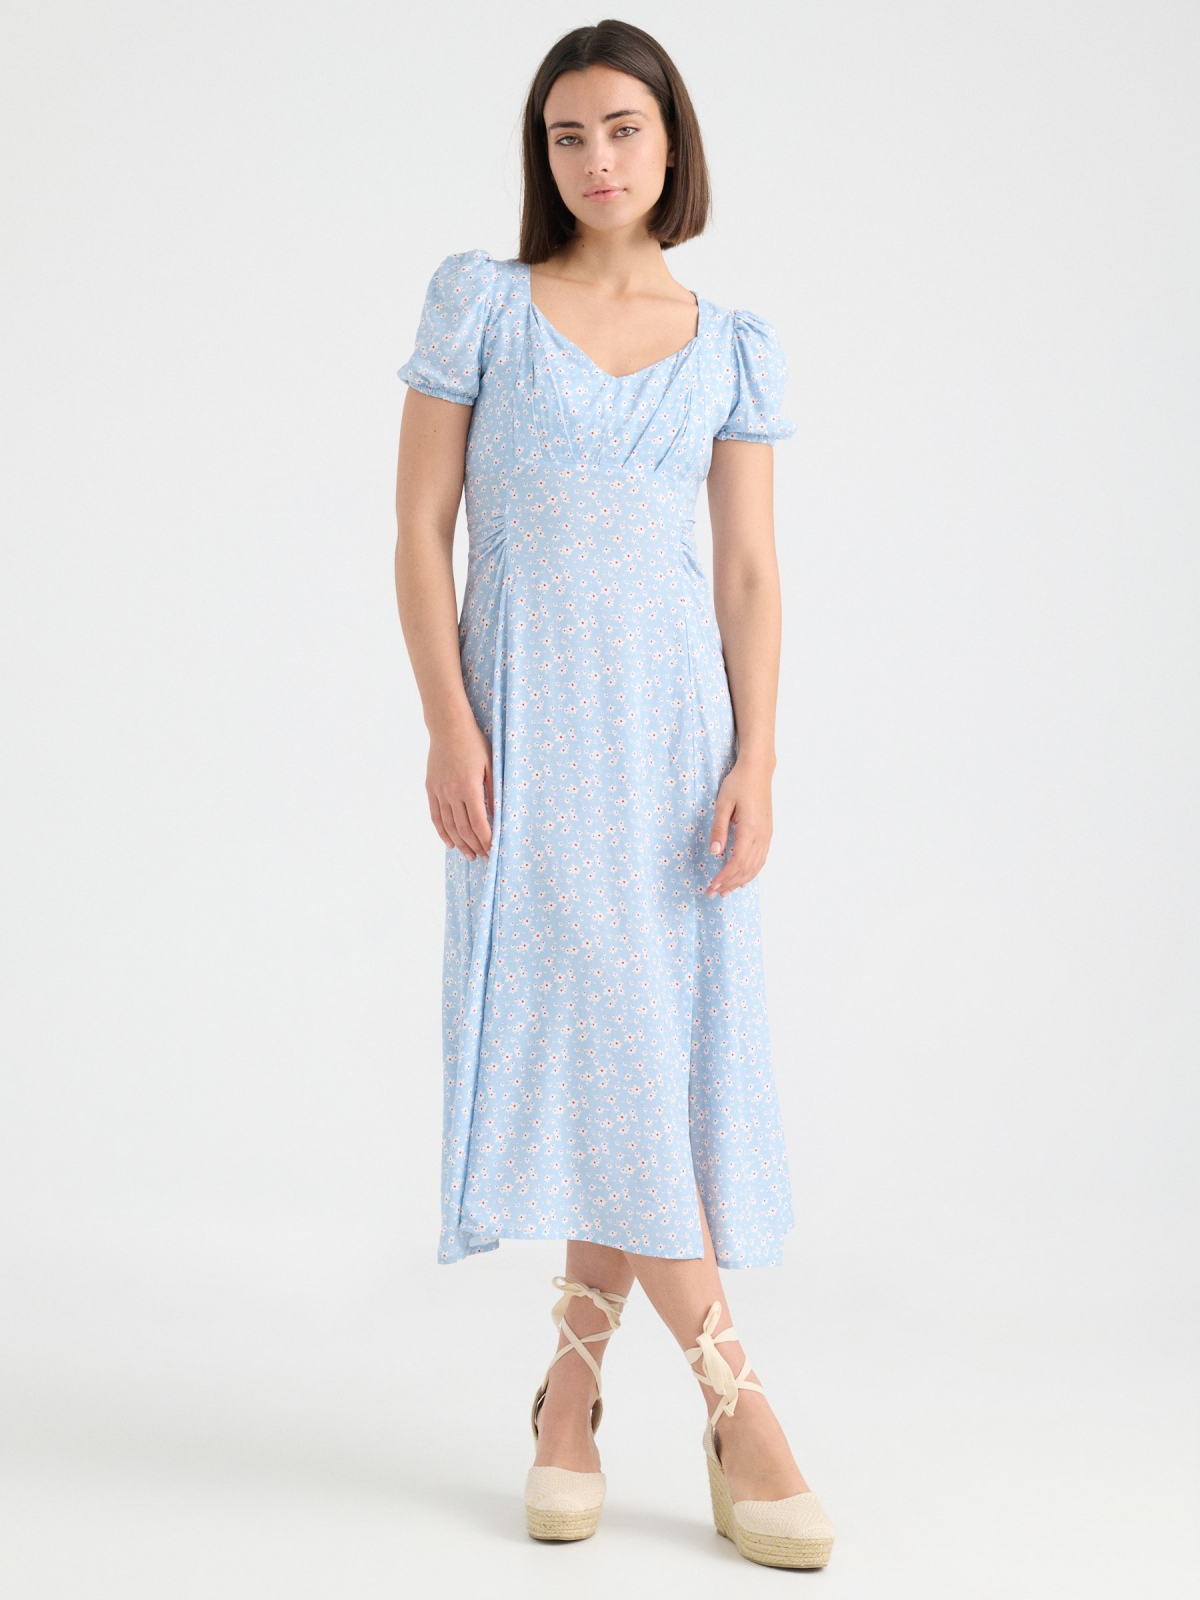 Daisy print midi dress light blue middle front view